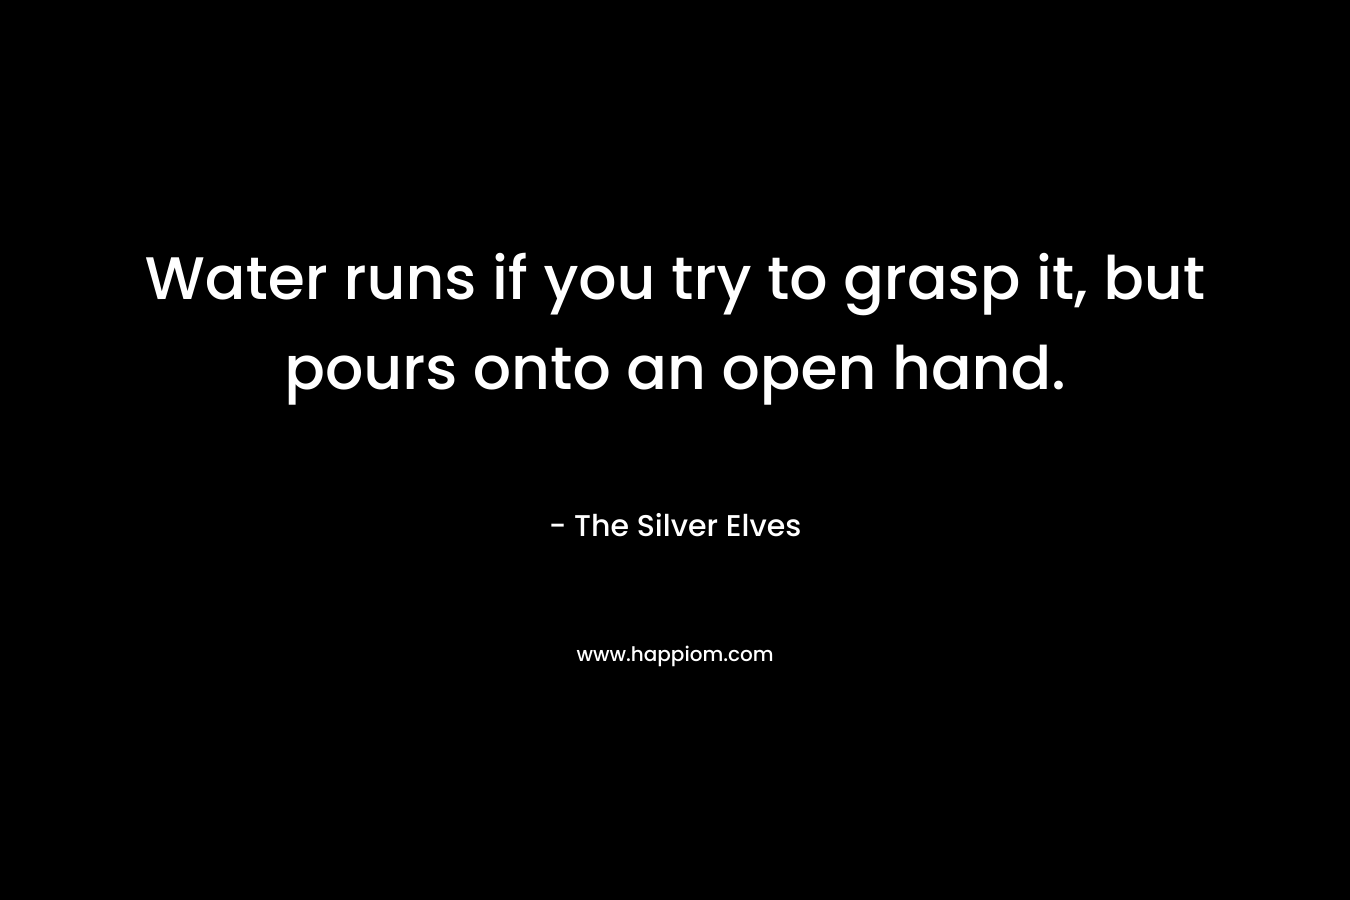 Water runs if you try to grasp it, but pours onto an open hand. – The Silver Elves